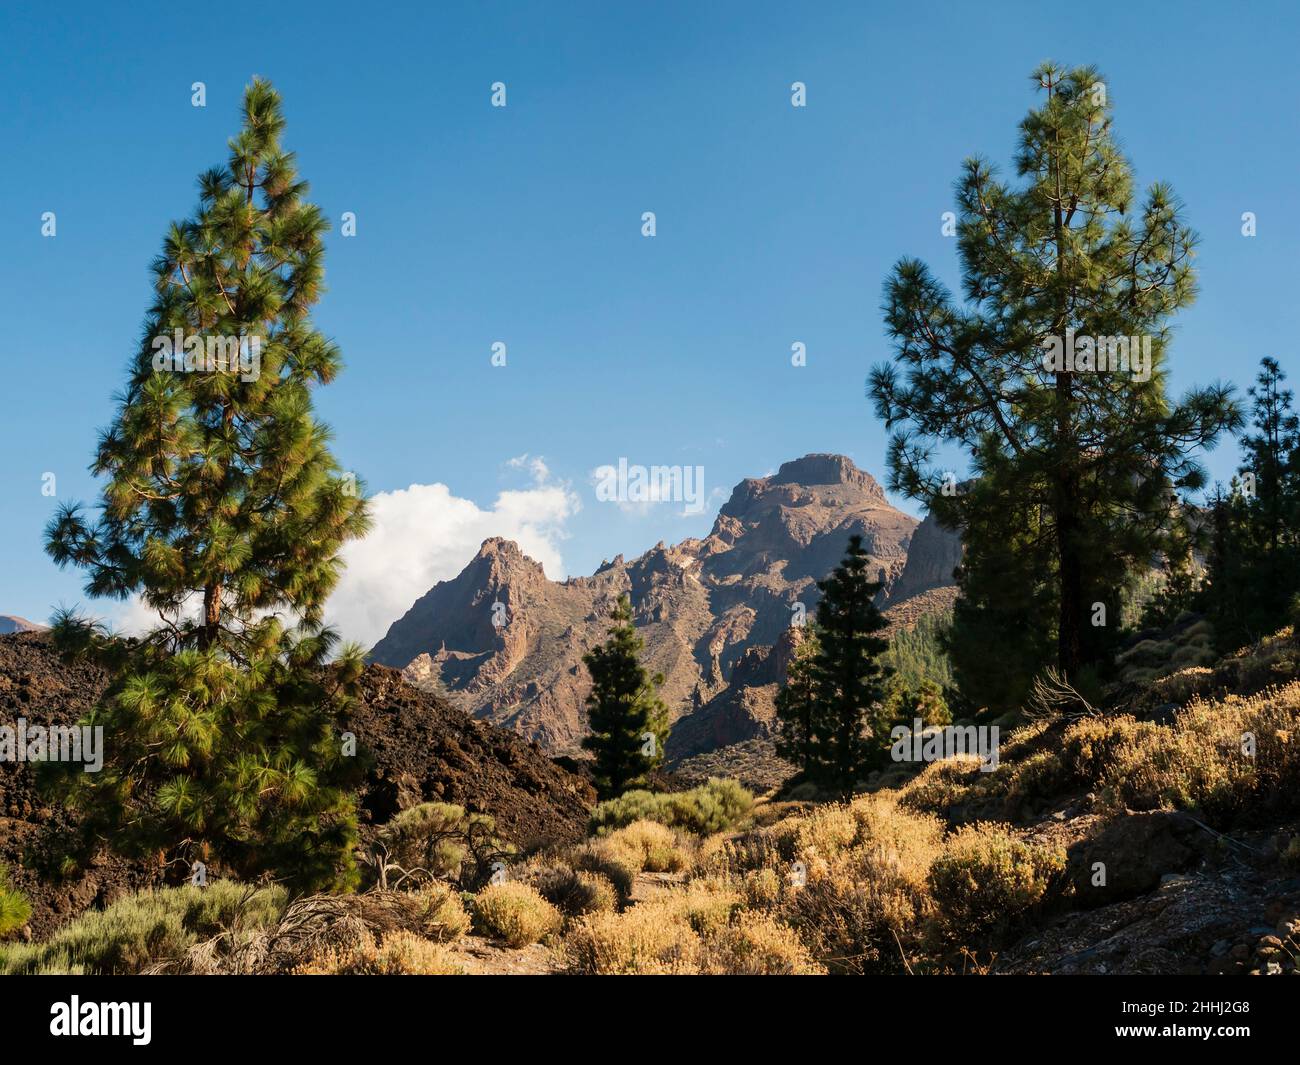 Canary pines in Tenerife. On walking path Red de Senderos TF18, approaching Boca Tauce. Stock Photo